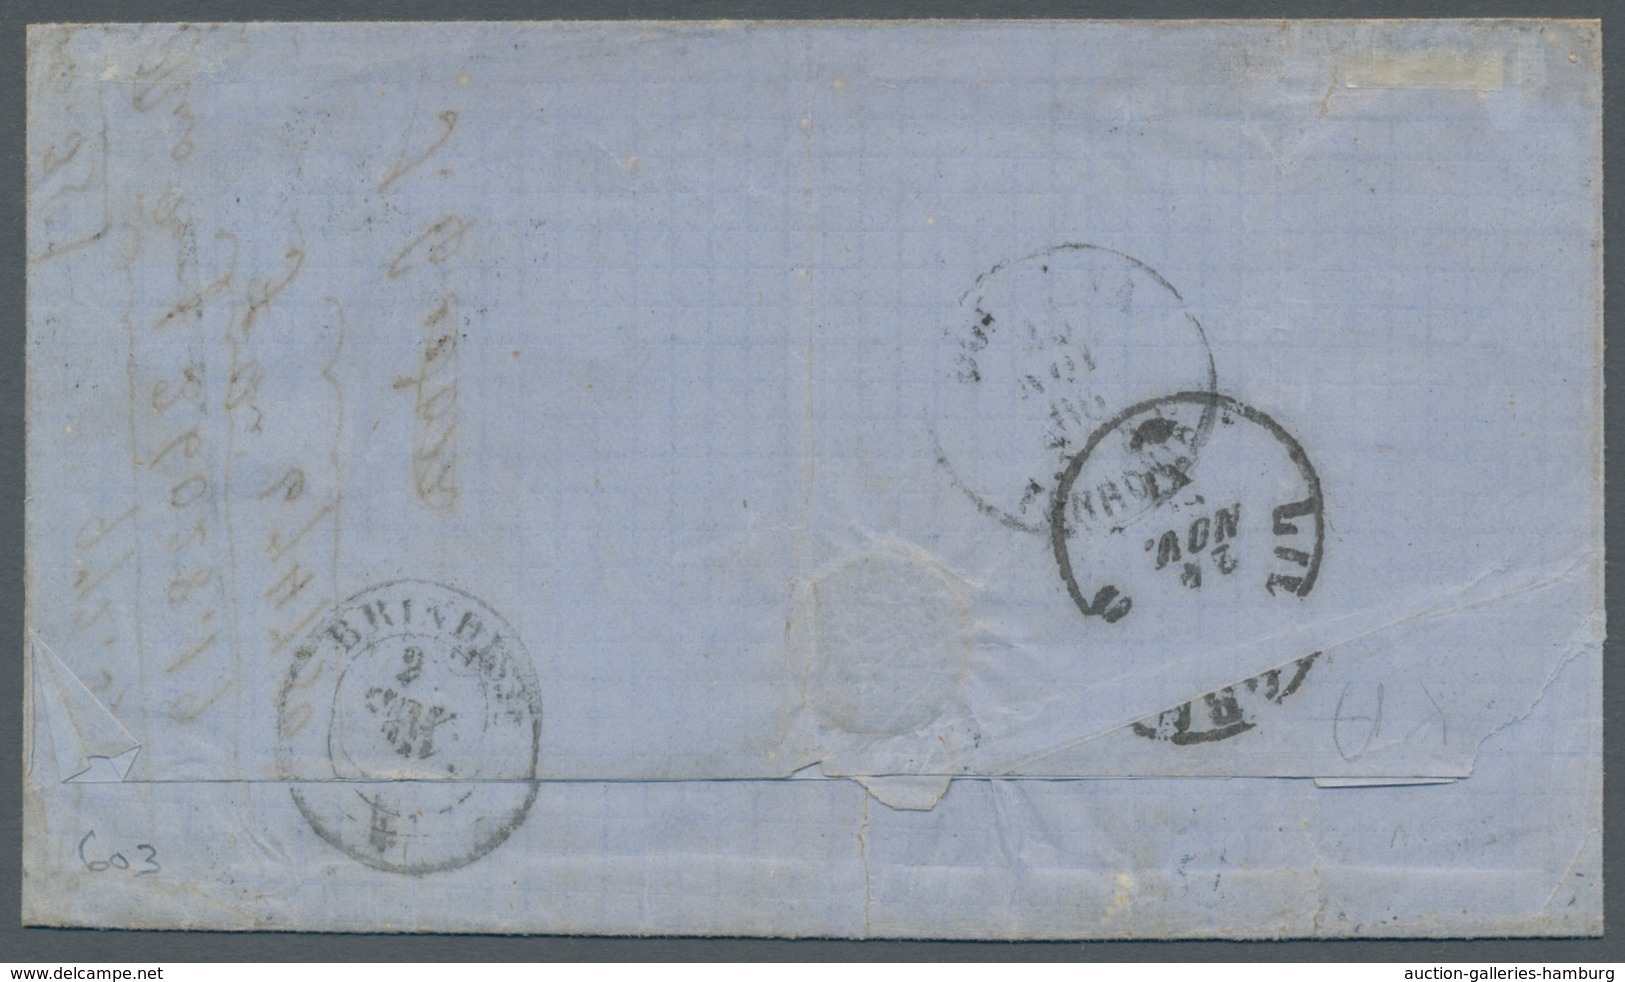 Ägypten: 1866, 1 Pi Lilac Perf 13 X 12 1/2 As Single Franking Tied To Folded Letter By Blue POSTE VI - 1866-1914 Khedivate Of Egypt